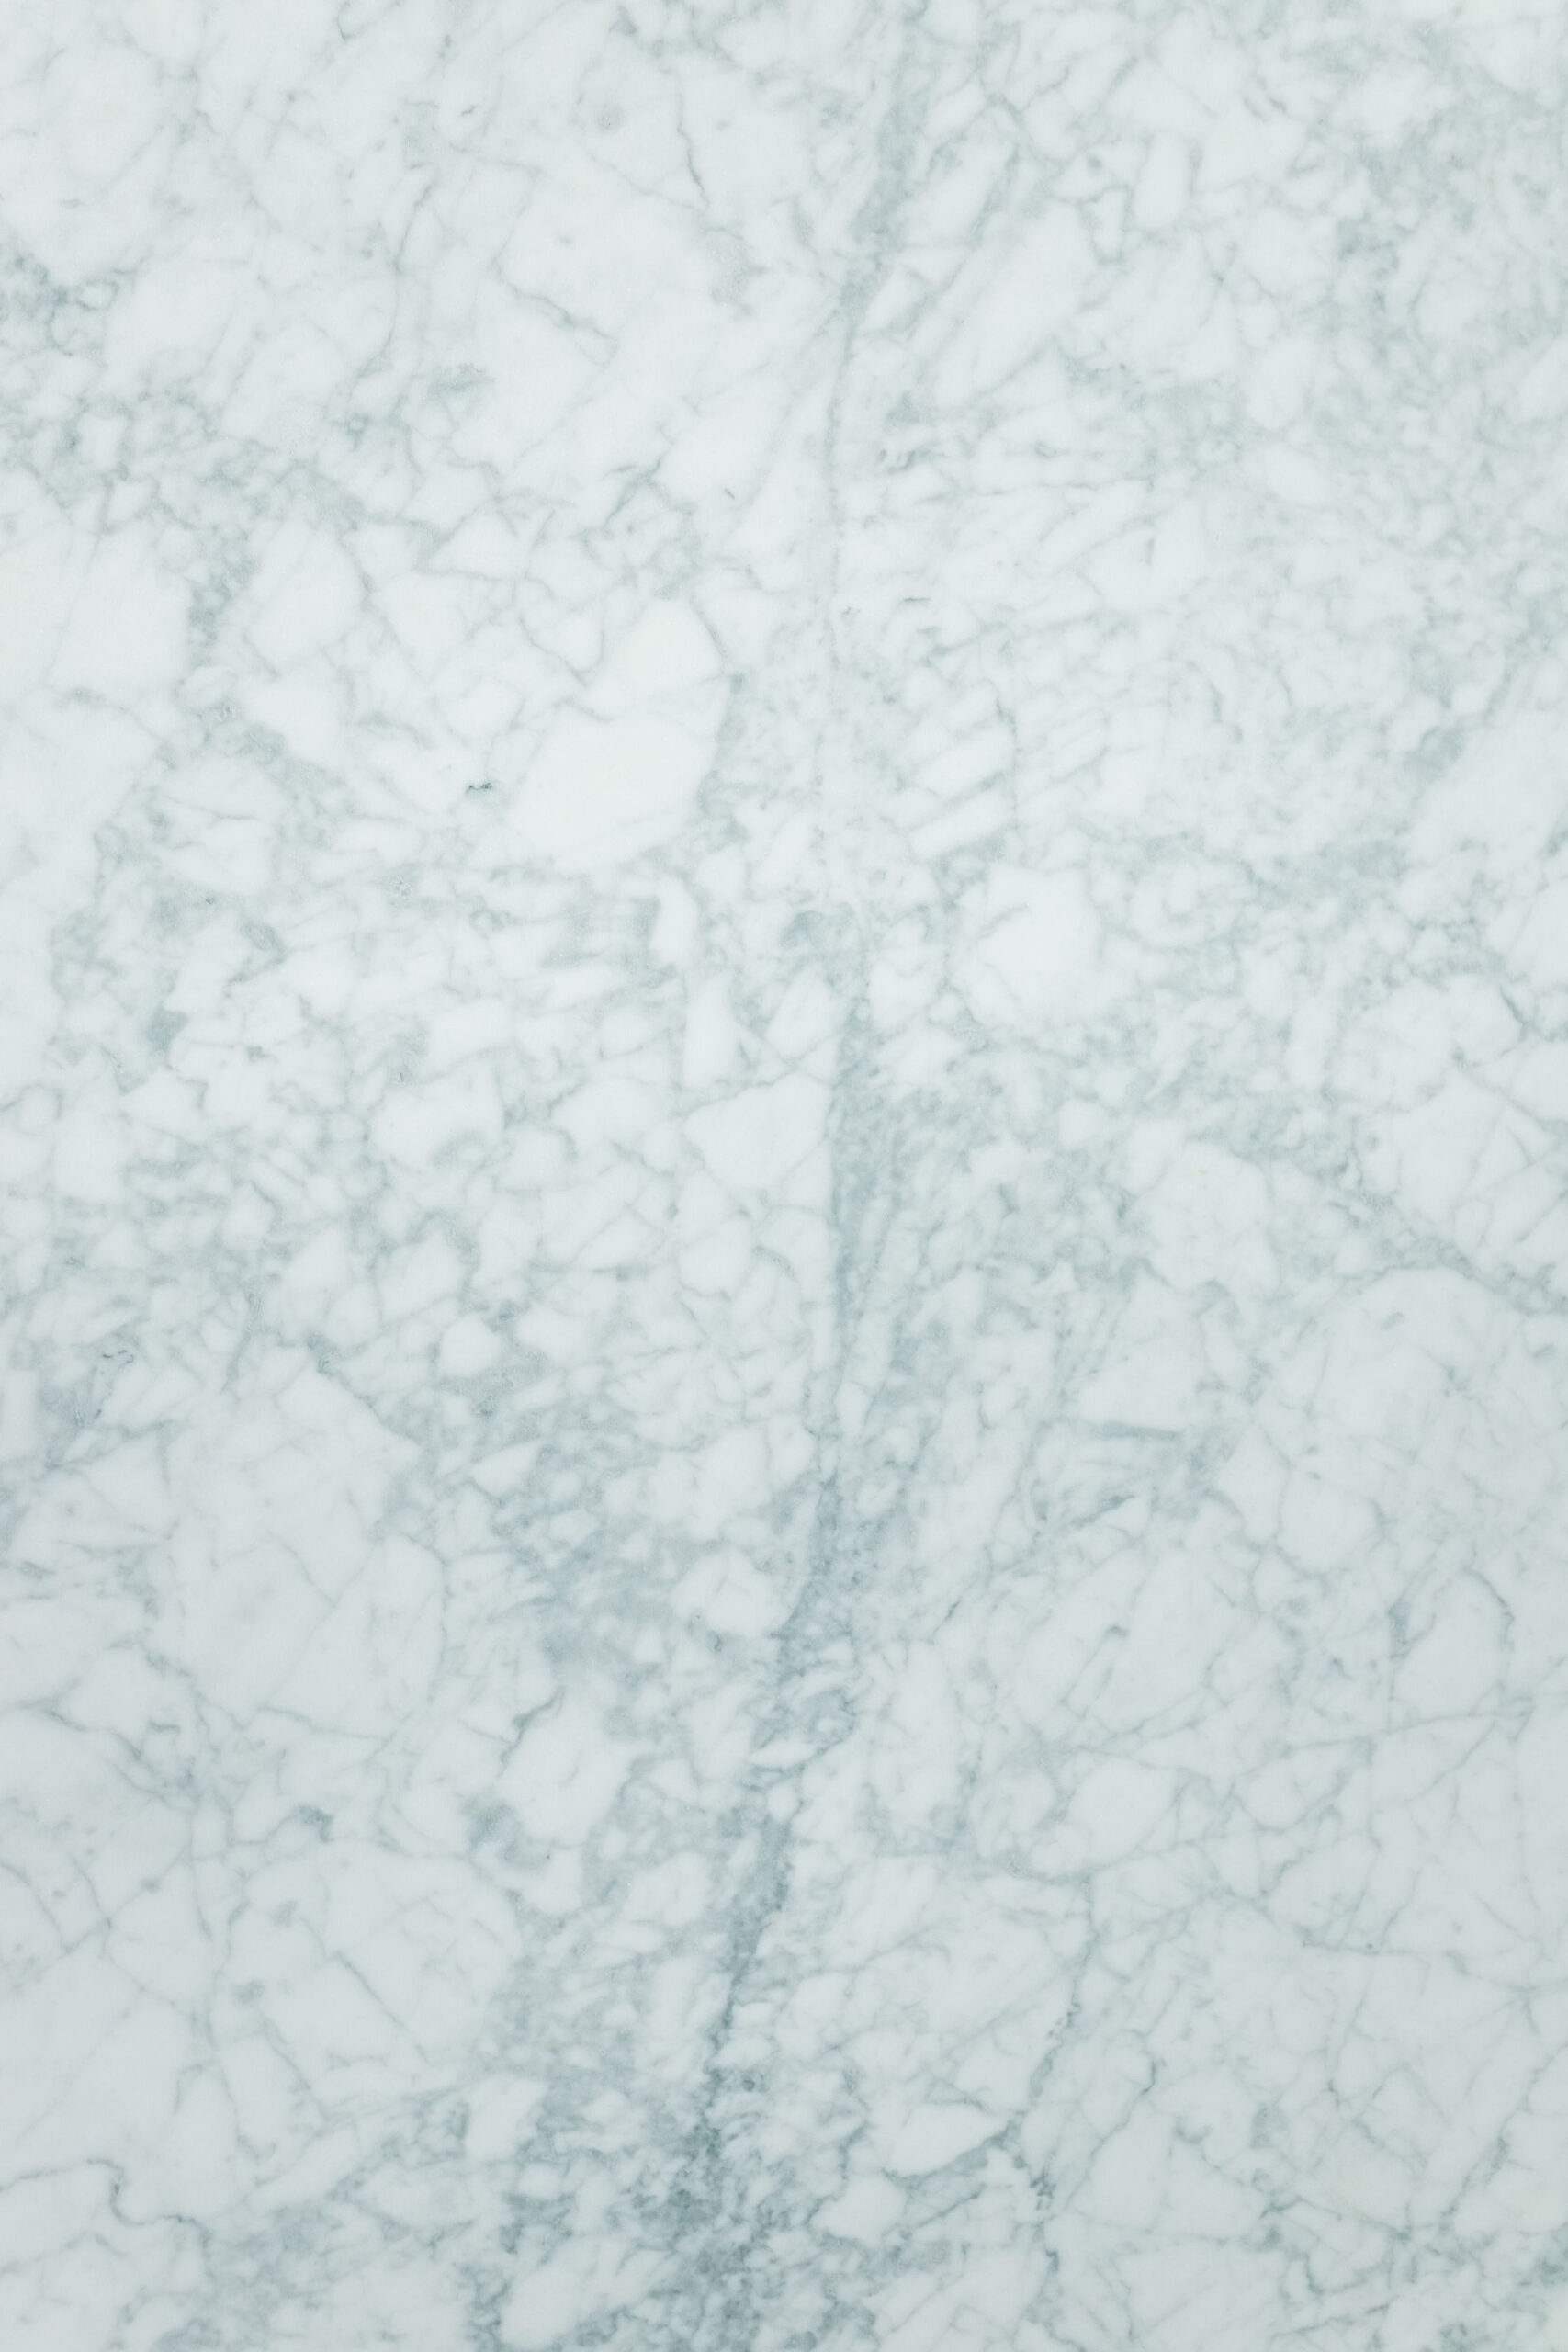 Marble Will Never Go Out Of Style. Do You Know Why?